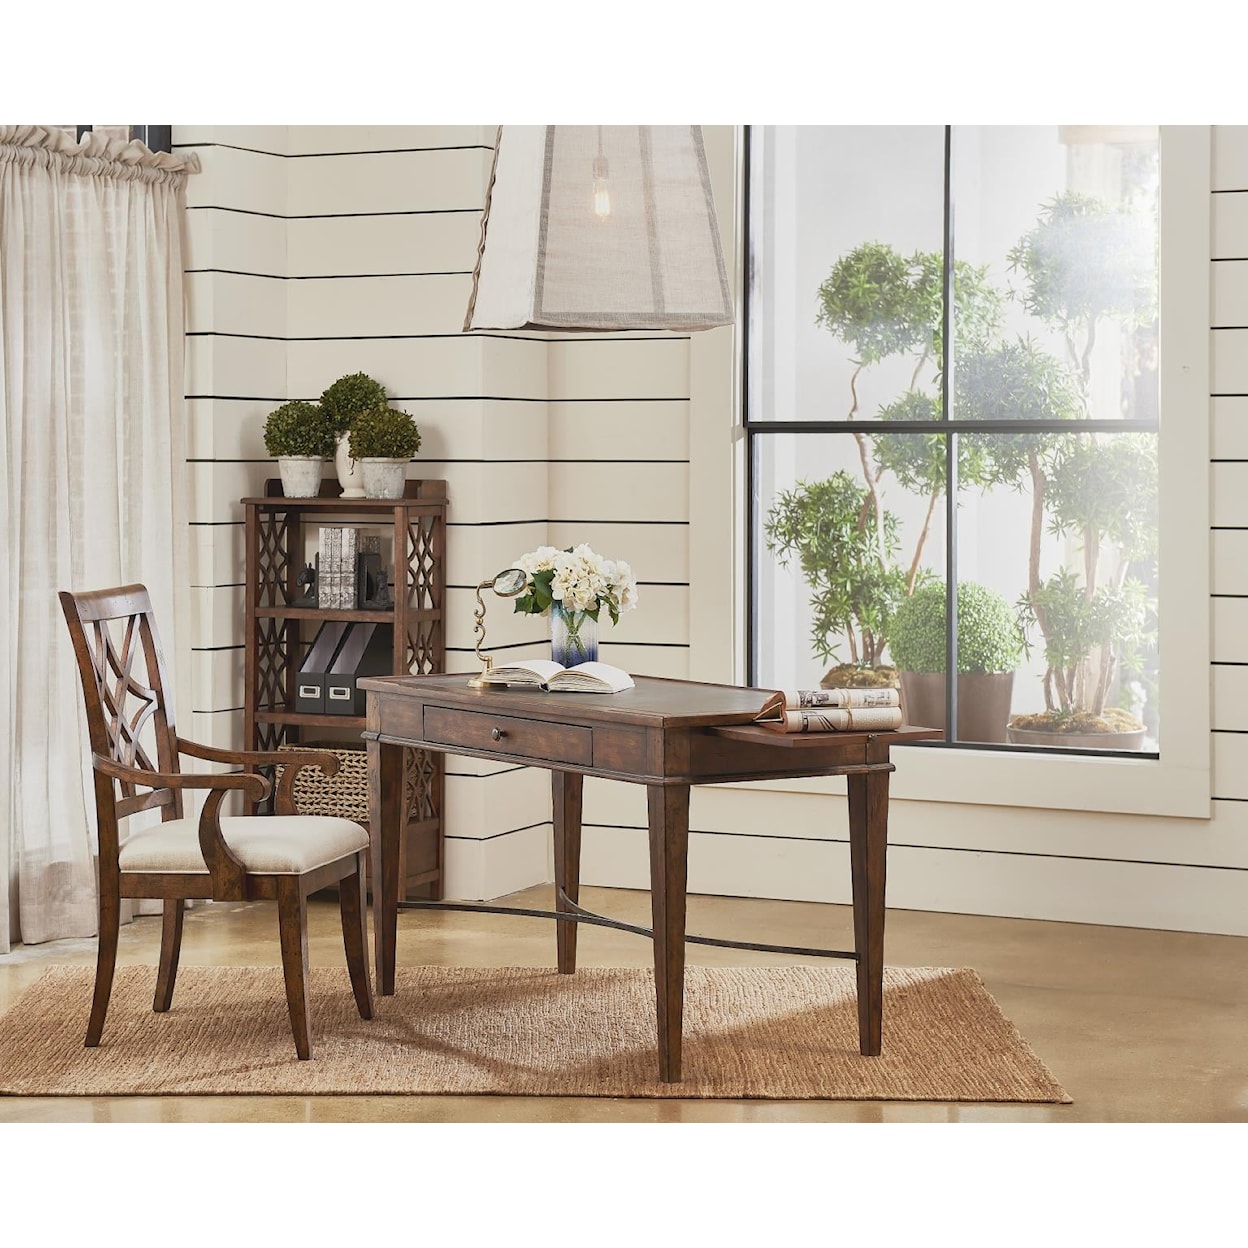 Trisha Yearwood Home Collection by Legacy Classic Trisha Yearwood Home Desk